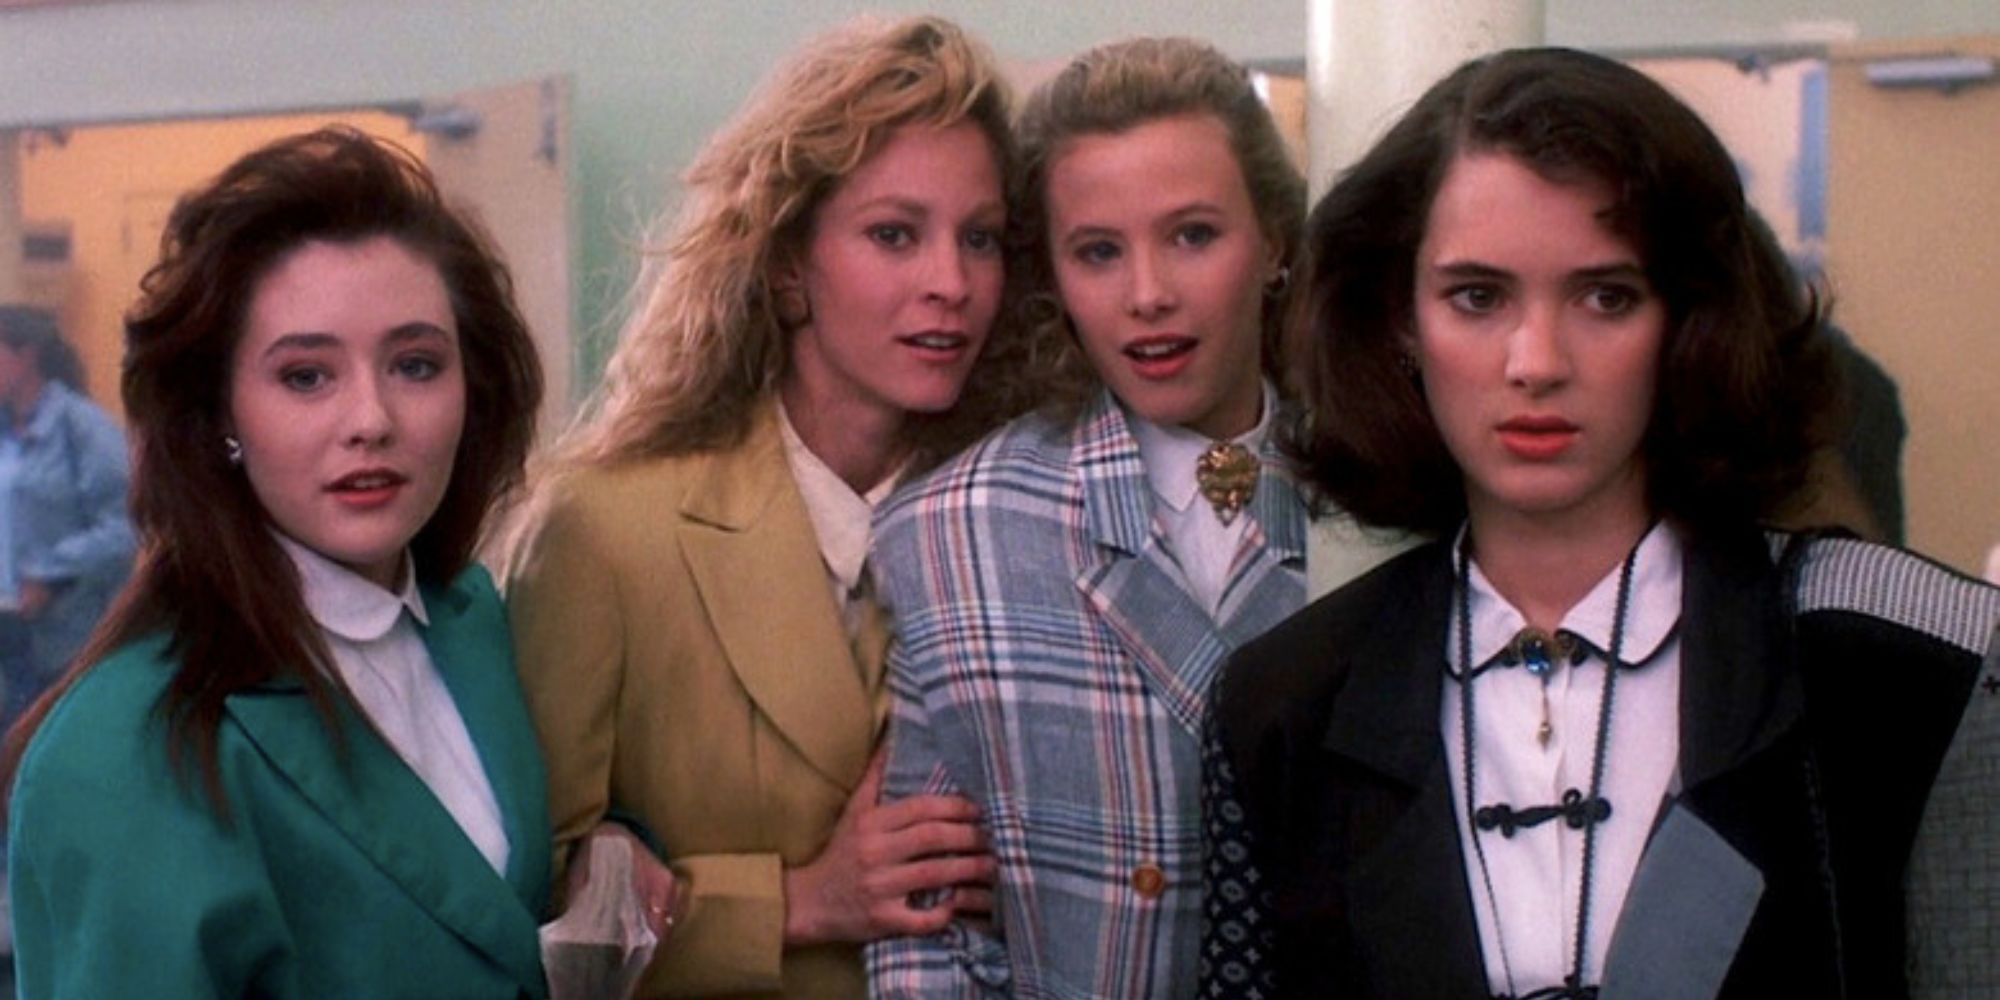 Winona Ryder as Veronica and Shannon Doherty, Lisanne Falk, and Kim Walker as three Heathers standing together in Heathers